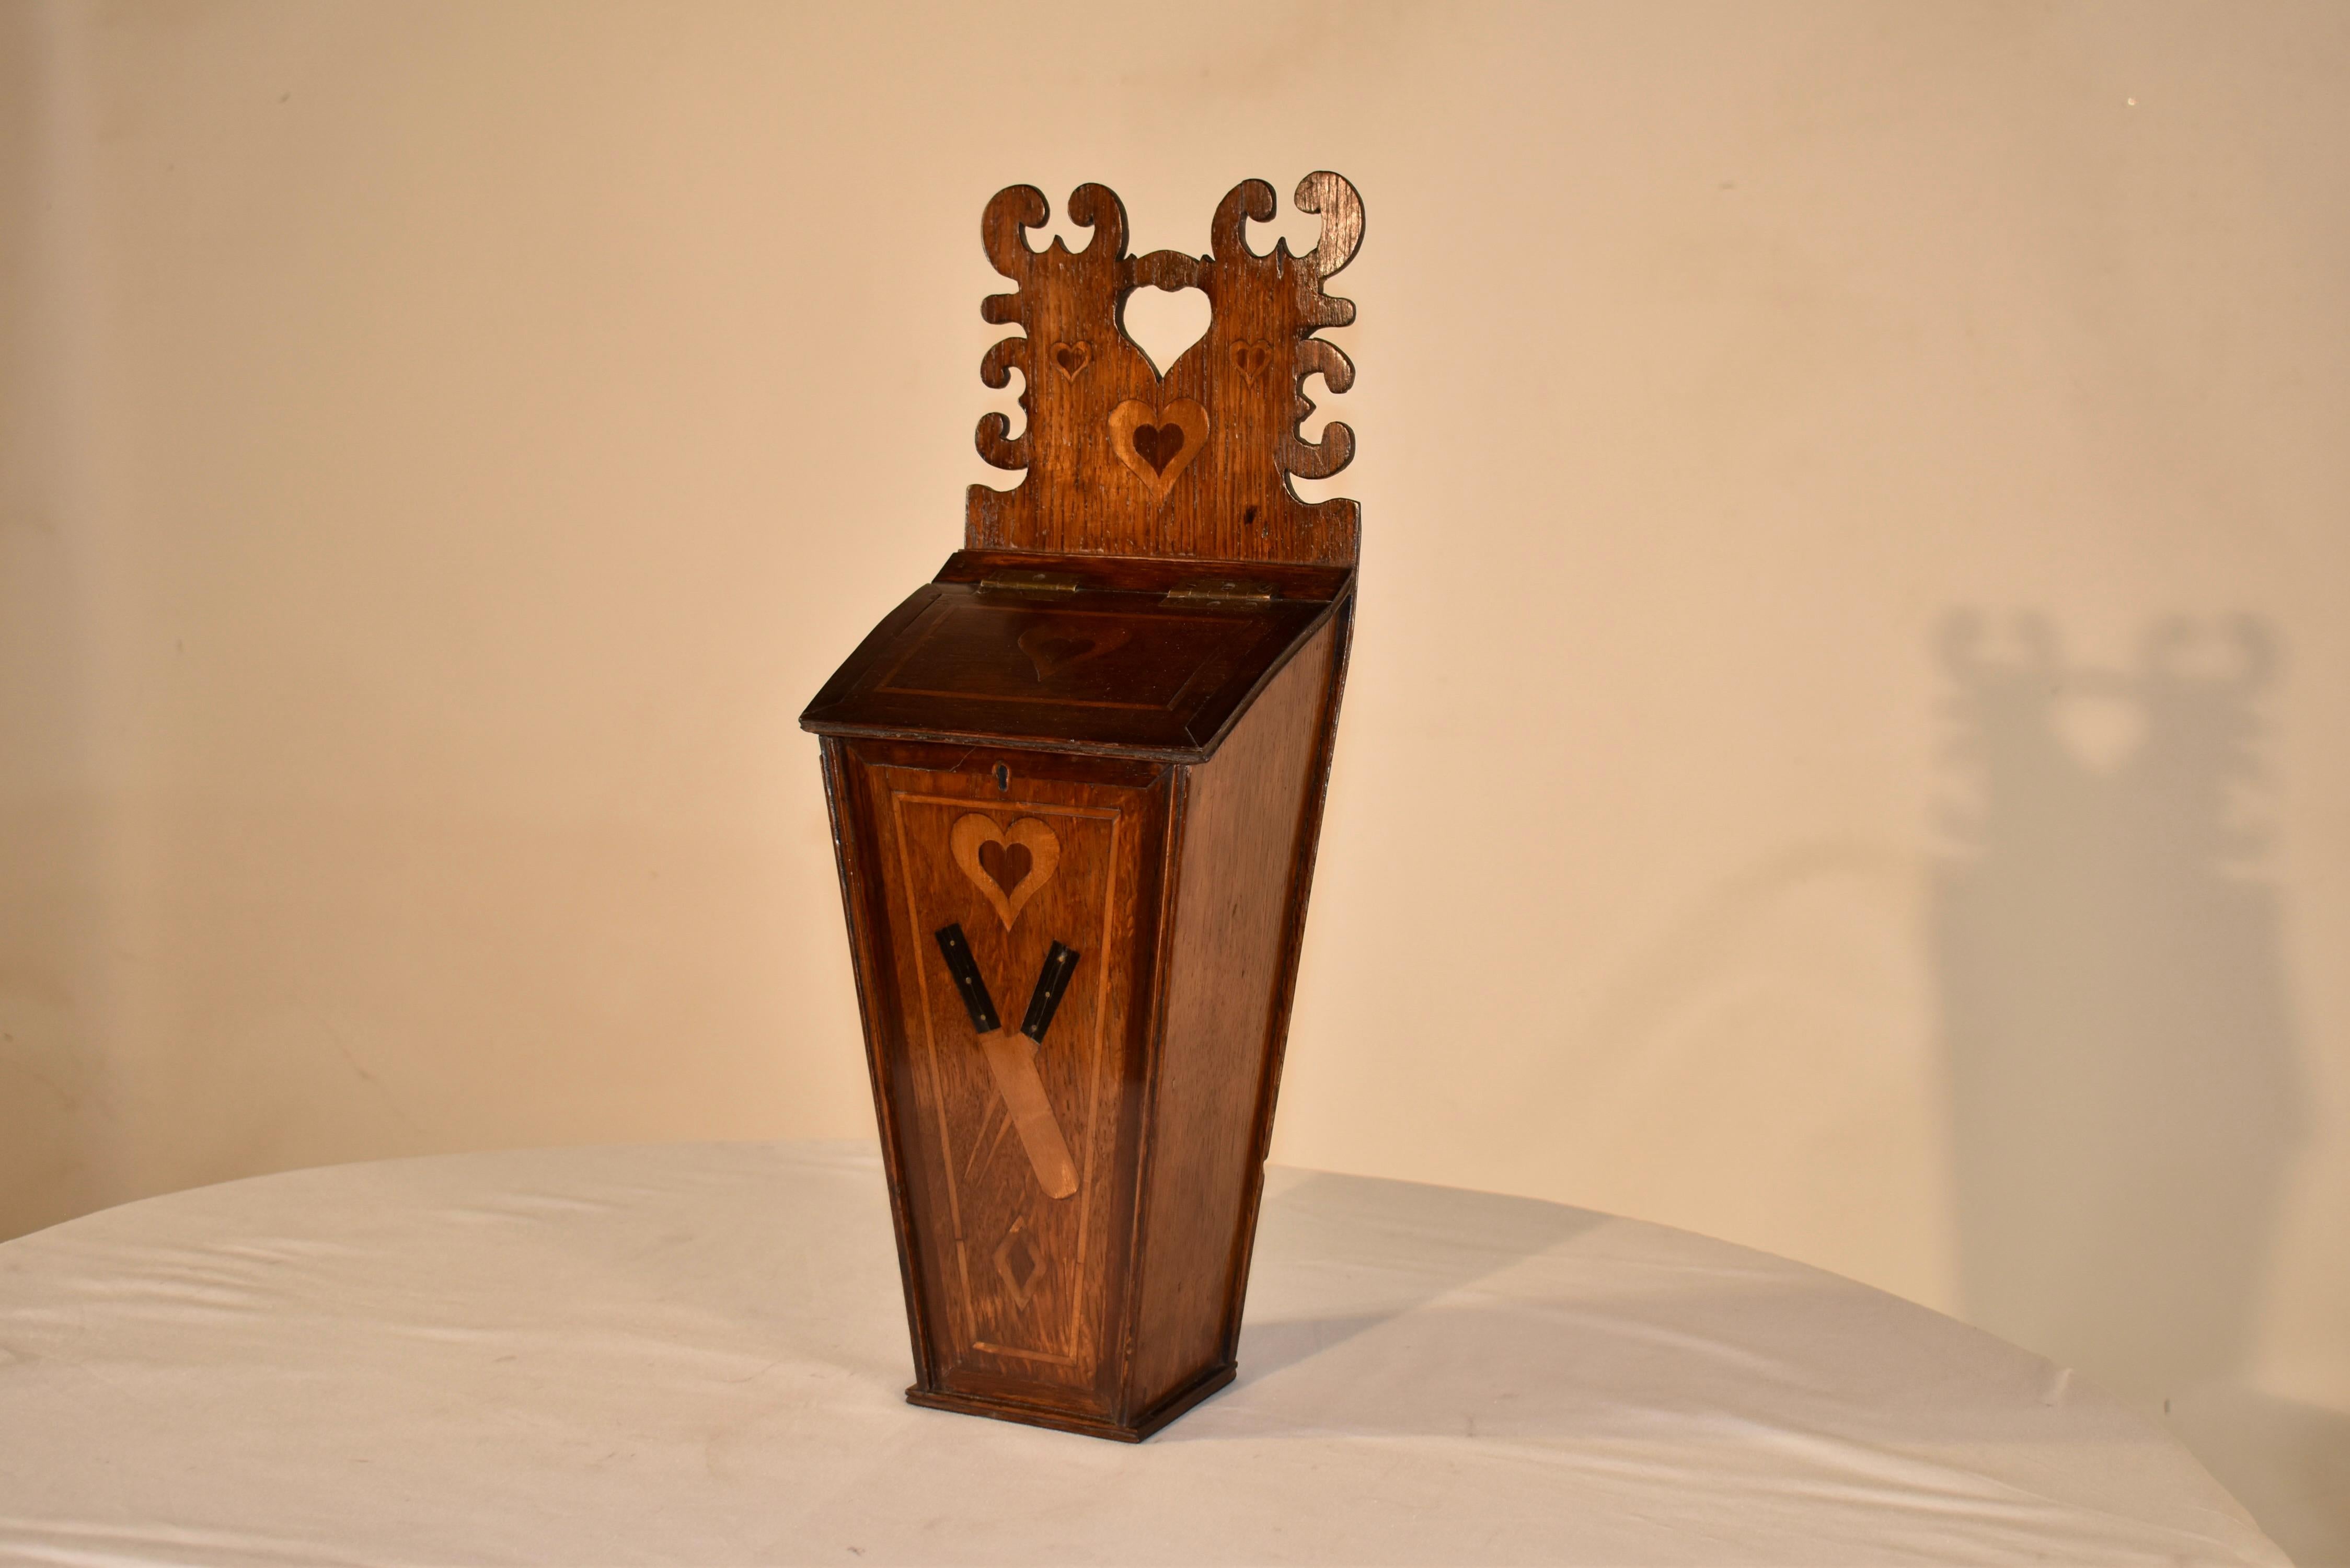 Early 19th century oak candle box from England.  This is a wonderful folk art box with loads of character!  The top of the box is hand carved and has wonderful scalloped shapes and a central heart, surrounded by inlaid hears for added whimsy.  The